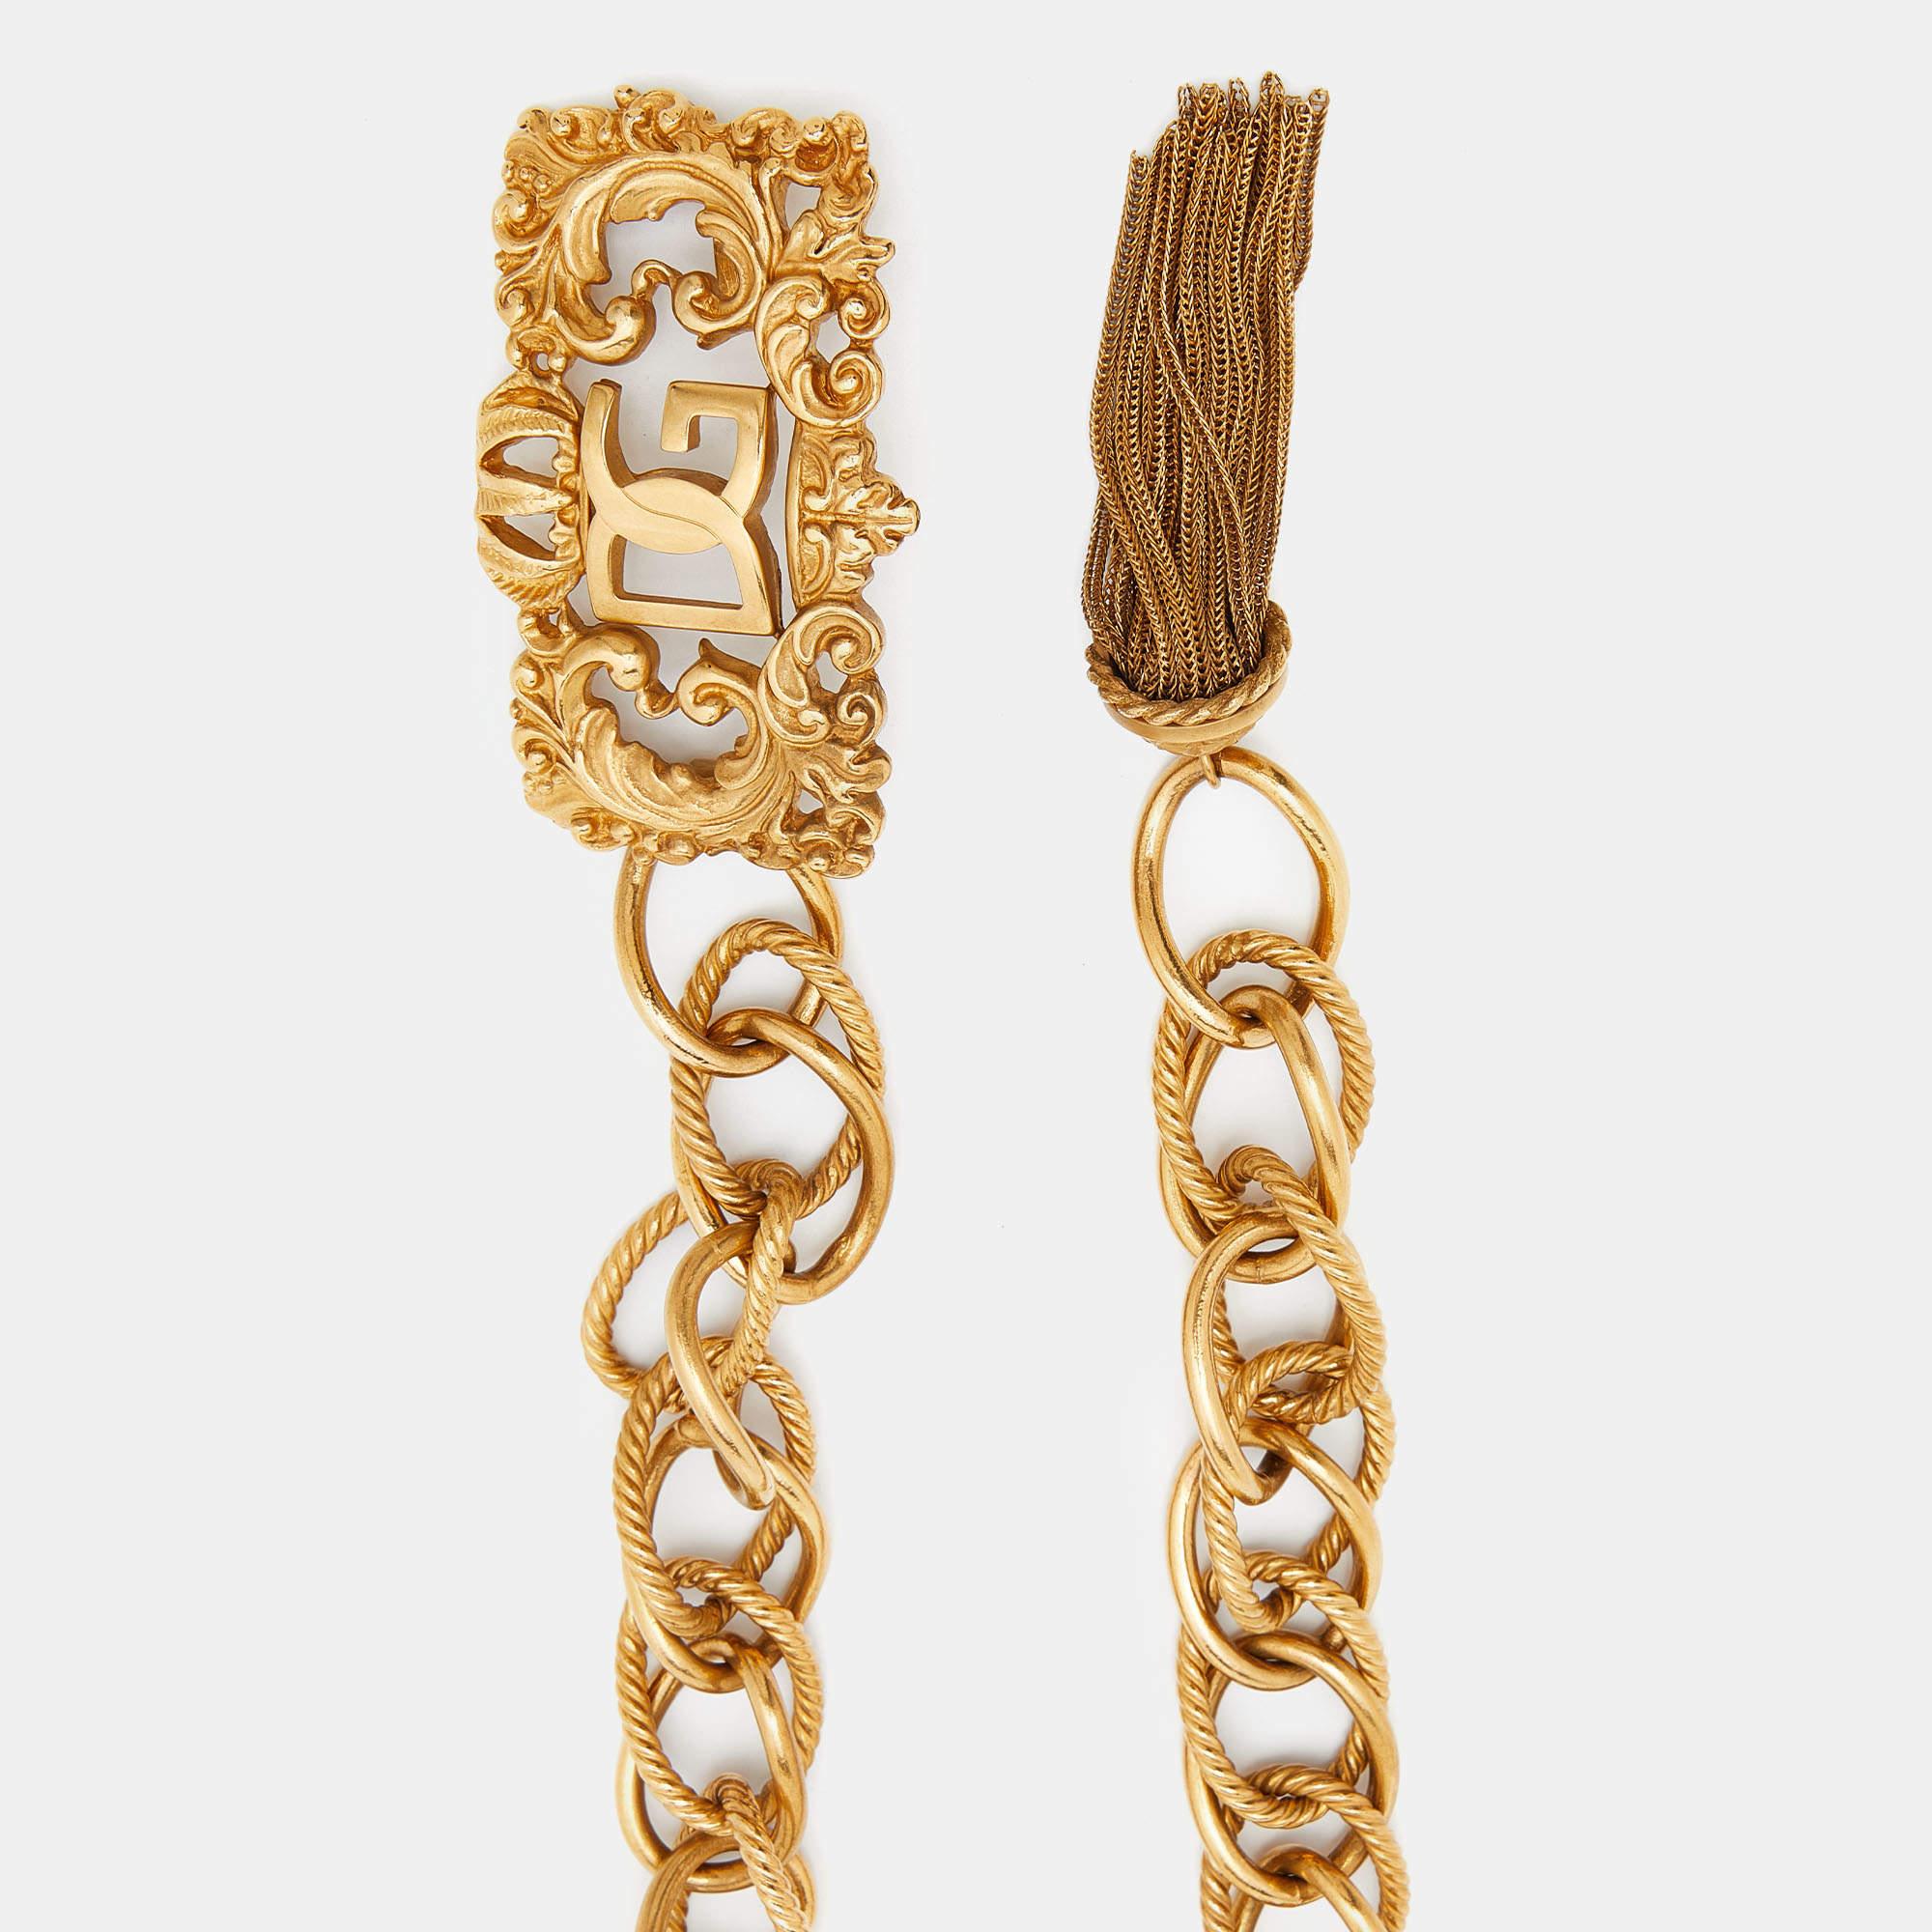 Crafted from gold-tone metal, this authentic Dolce & Gabbana chain belt has a beautiful look and a simple fastening for the desired fit. Use it to cinch blazers and flowy dresses.

Includes: Original Dustbag

